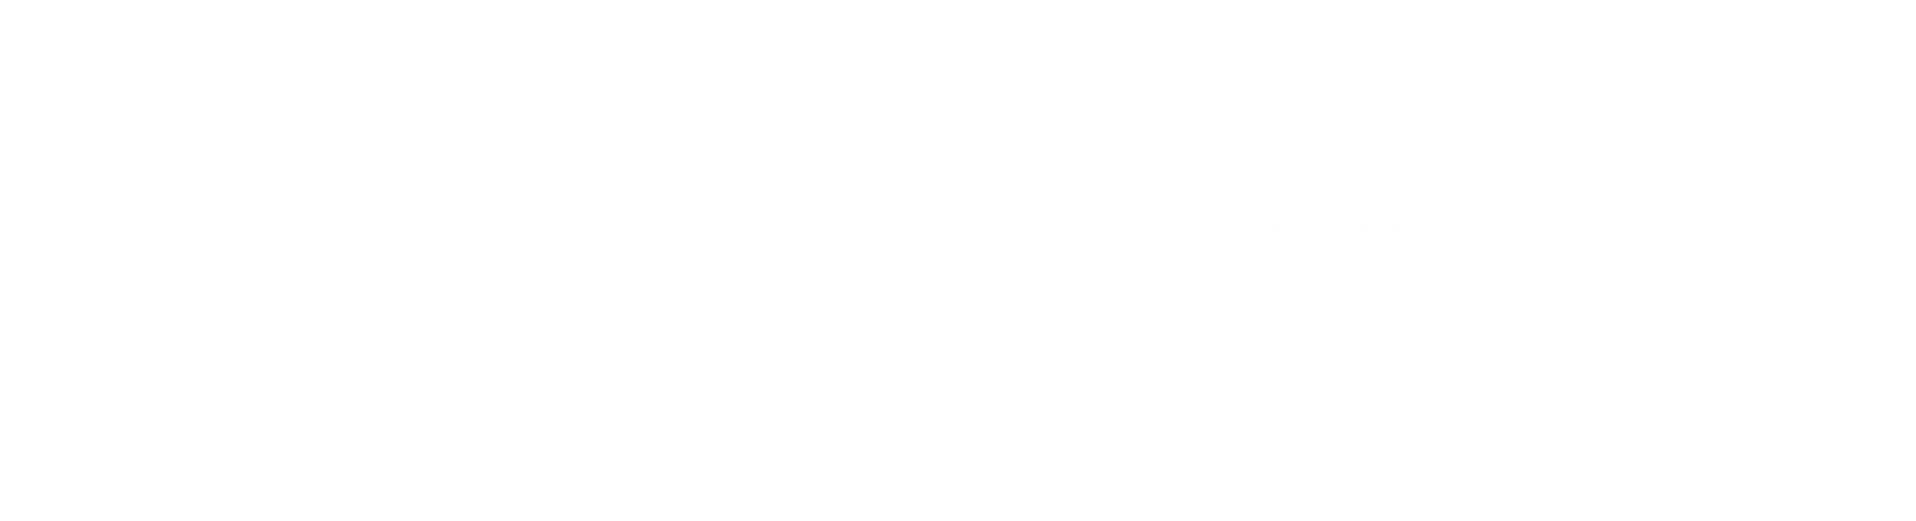 Focal Point Pond logo | professional pond installers in Tampa FL